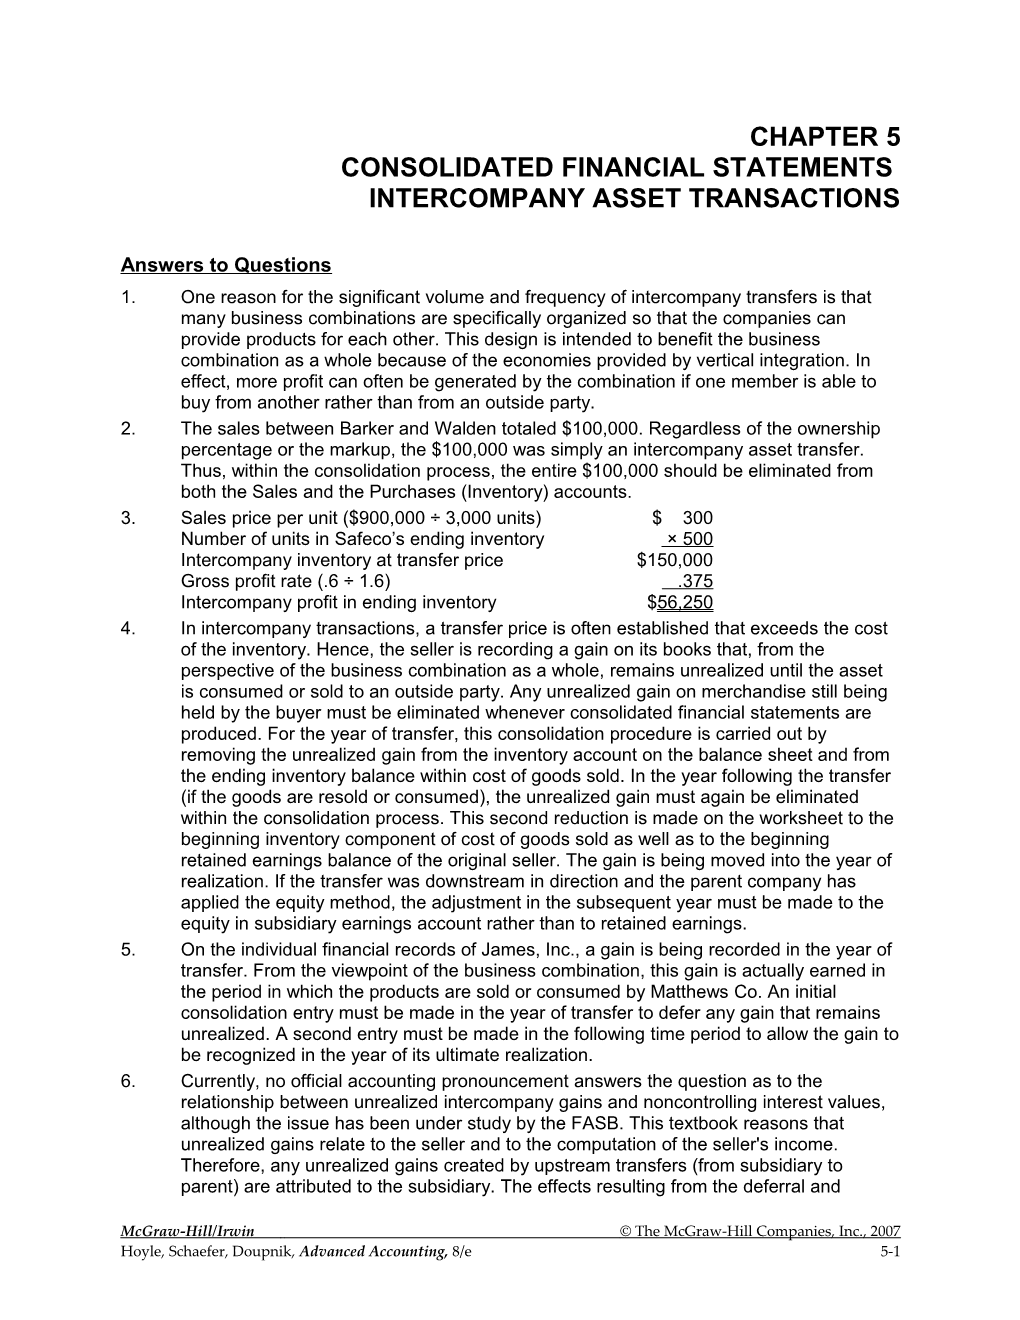 Consolidated Financial Statements Intercompany Asset Transactions